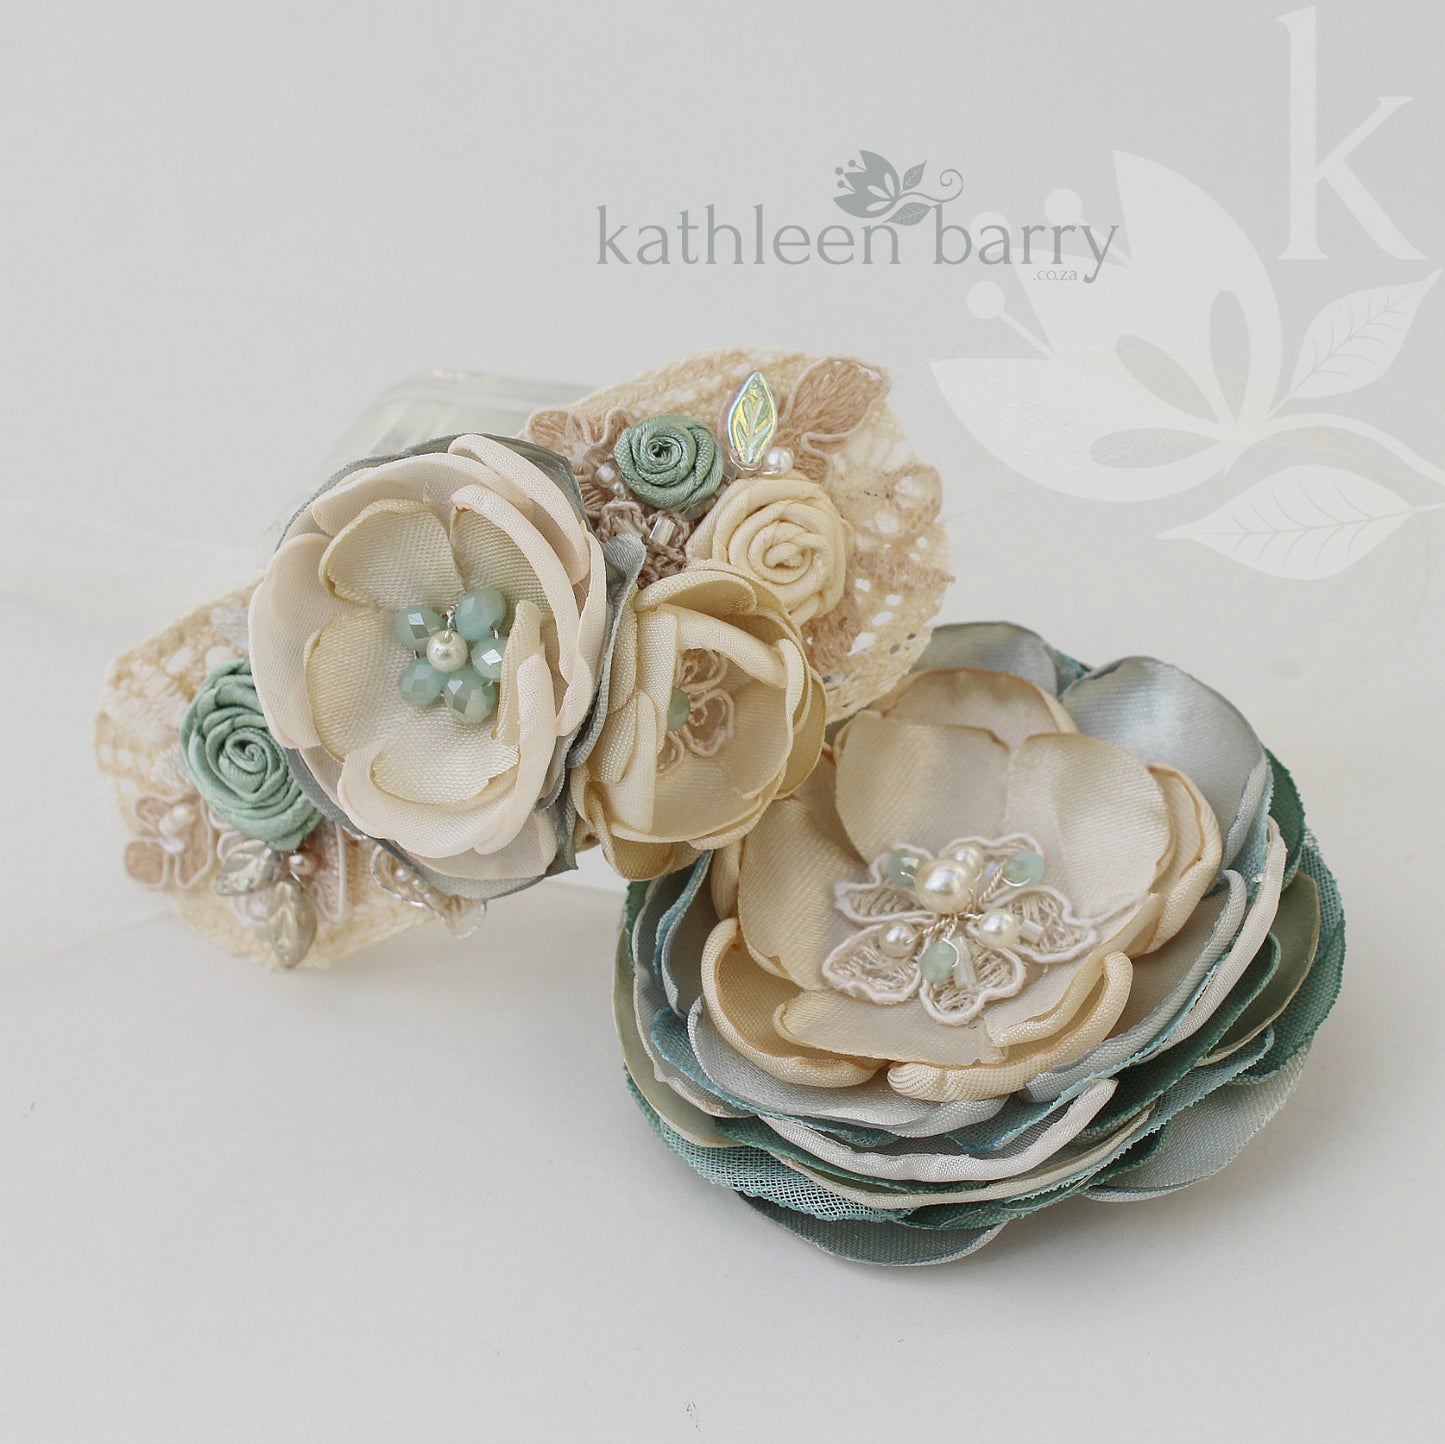 Wrist Corsage Lace fabric flowers - Bridal or Prom - color options available